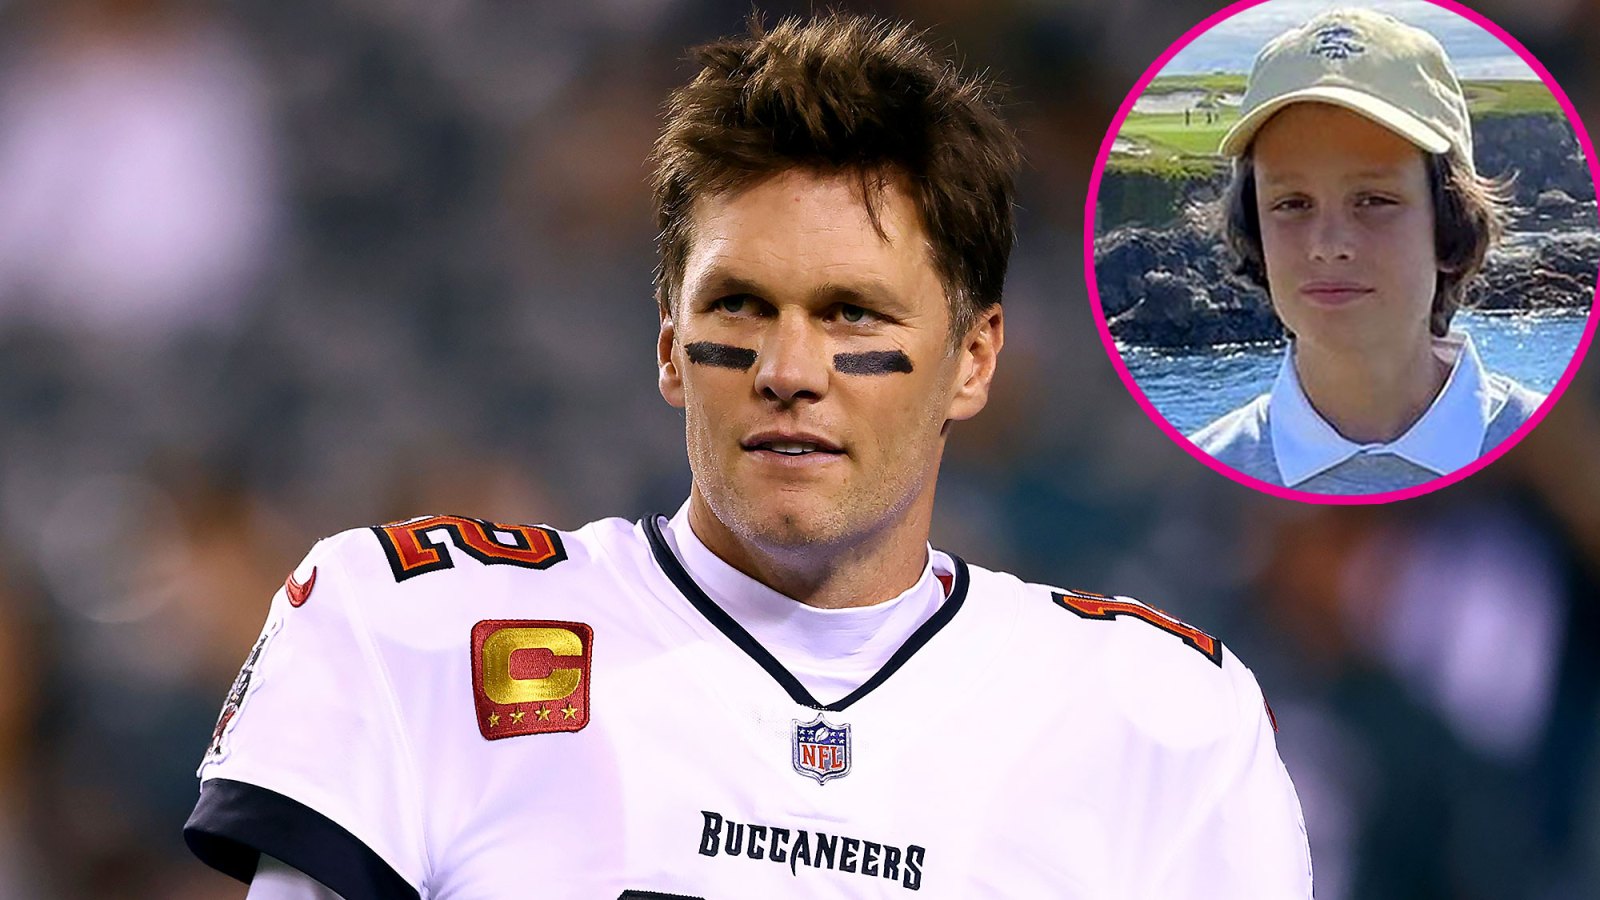 Tom Brady Reveals Whether He Wants Son Jack to Follow His Football Footsteps